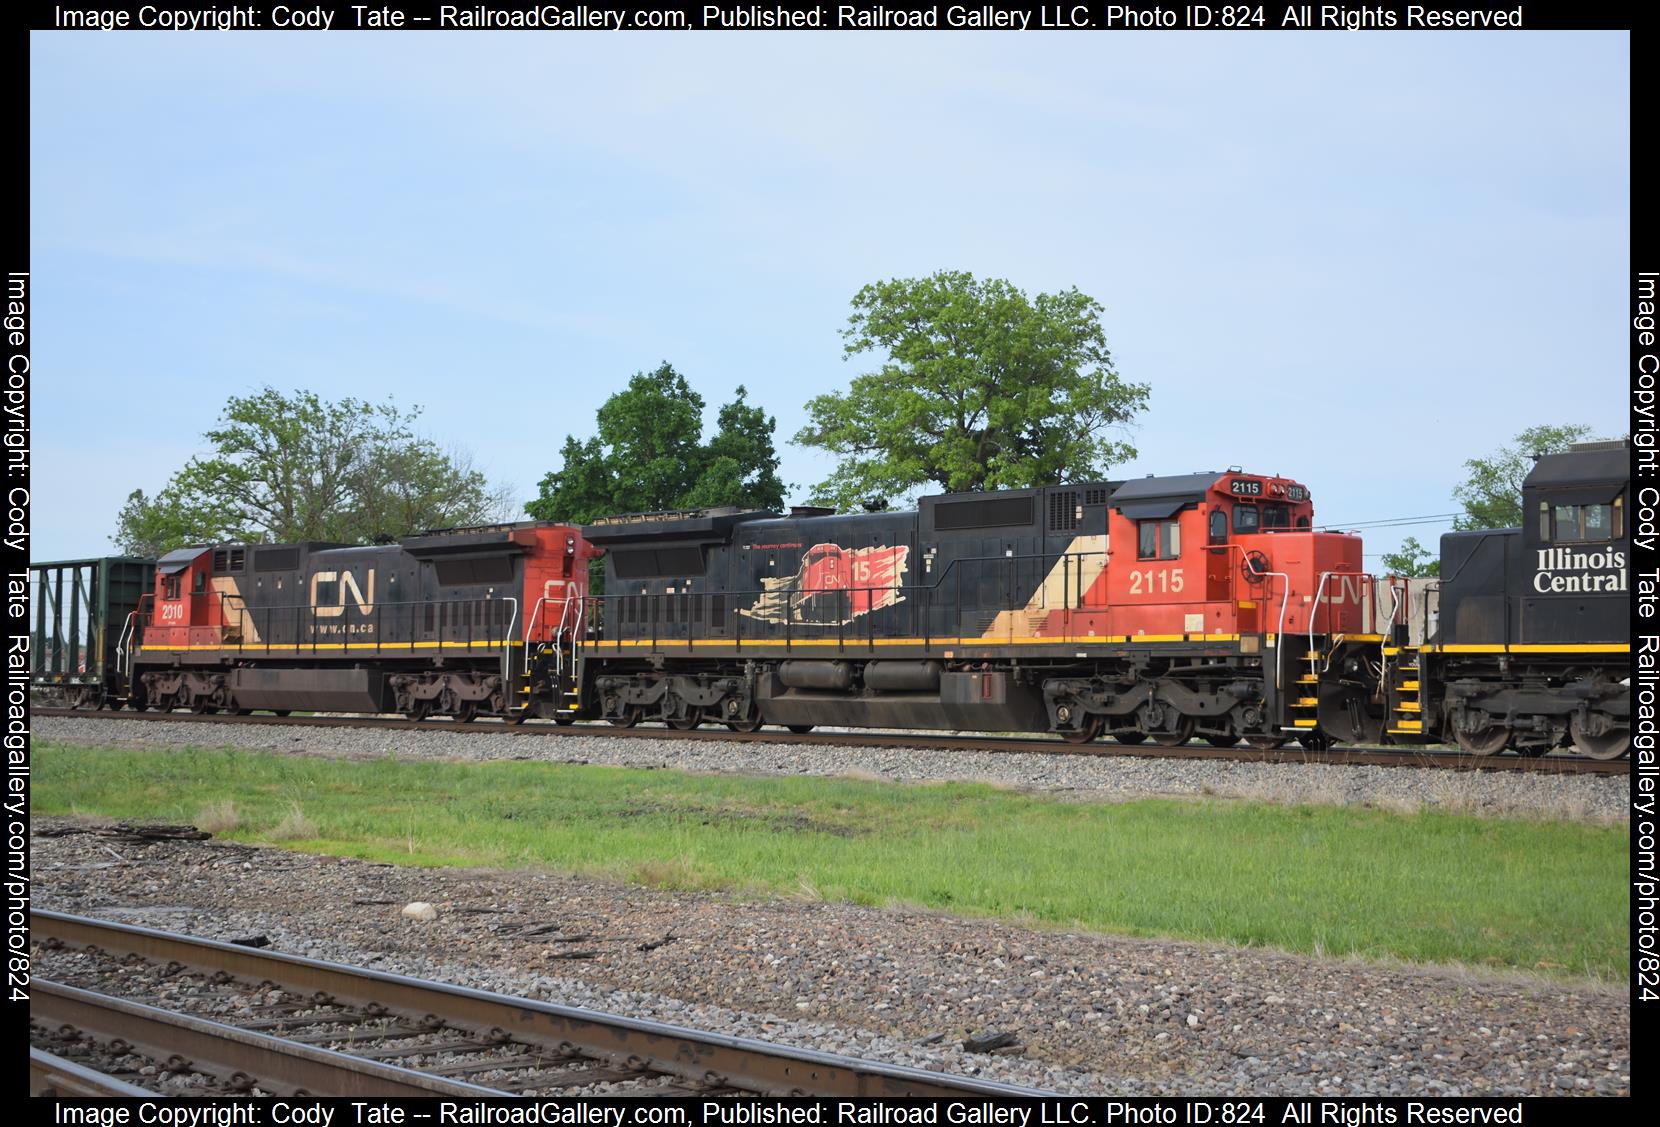 CN 2115  is a class C40-8 and  is pictured in Centralia, Illinois, USA.  This was taken along the Centralia subdivision  on the Canadian National Railway. Photo Copyright: Cody  Tate uploaded to Railroad Gallery on 03/10/2023. This photograph of CN 2115  was taken on Tuesday, May 17, 2022. All Rights Reserved. 